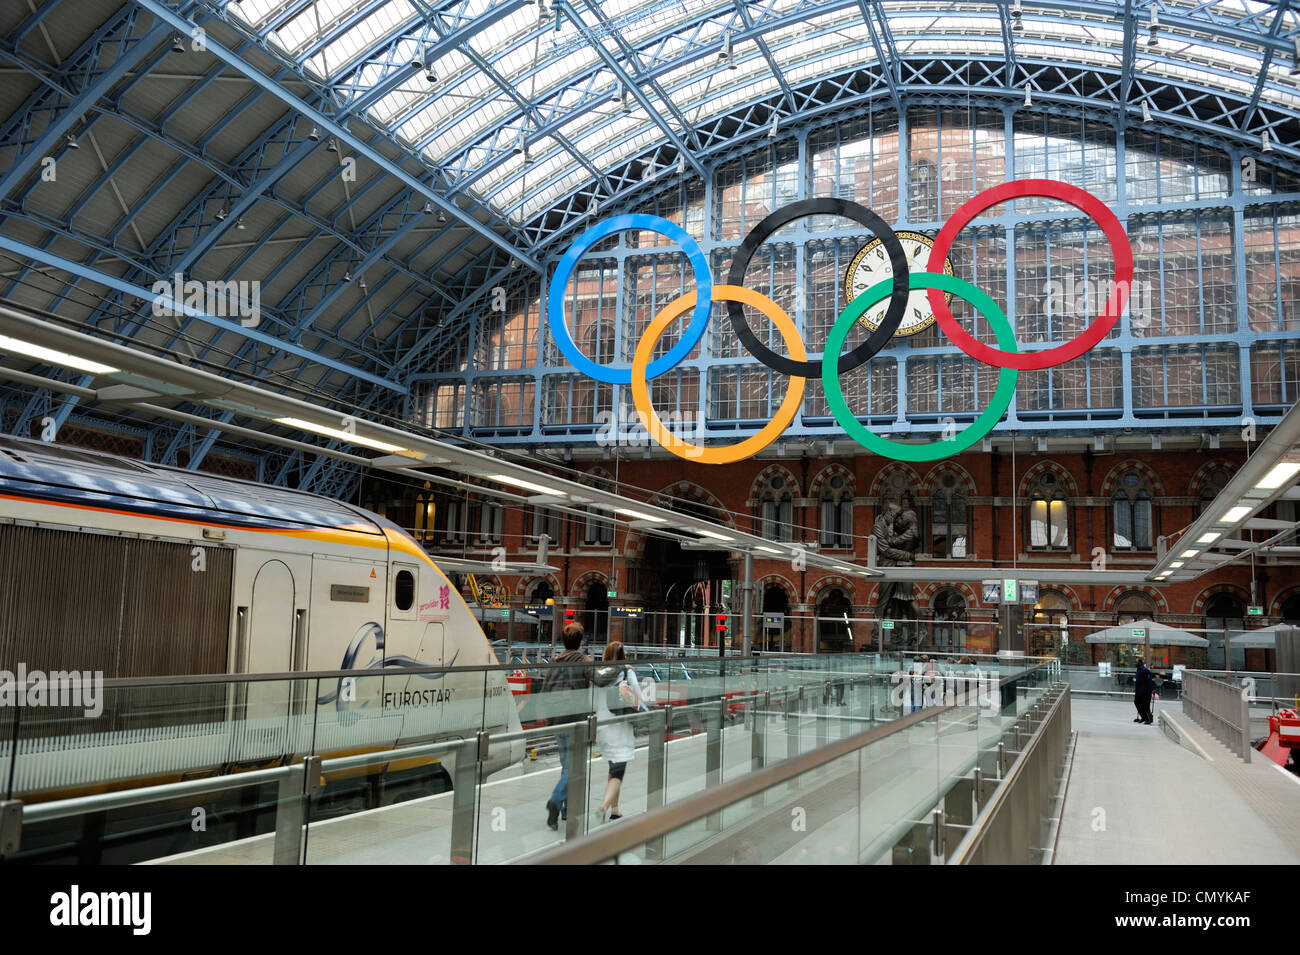 United Kingdom, London, St. Pancras station, Eurostar train and tcouple on the platform with the symbol of the Olympic Games Stock Photo